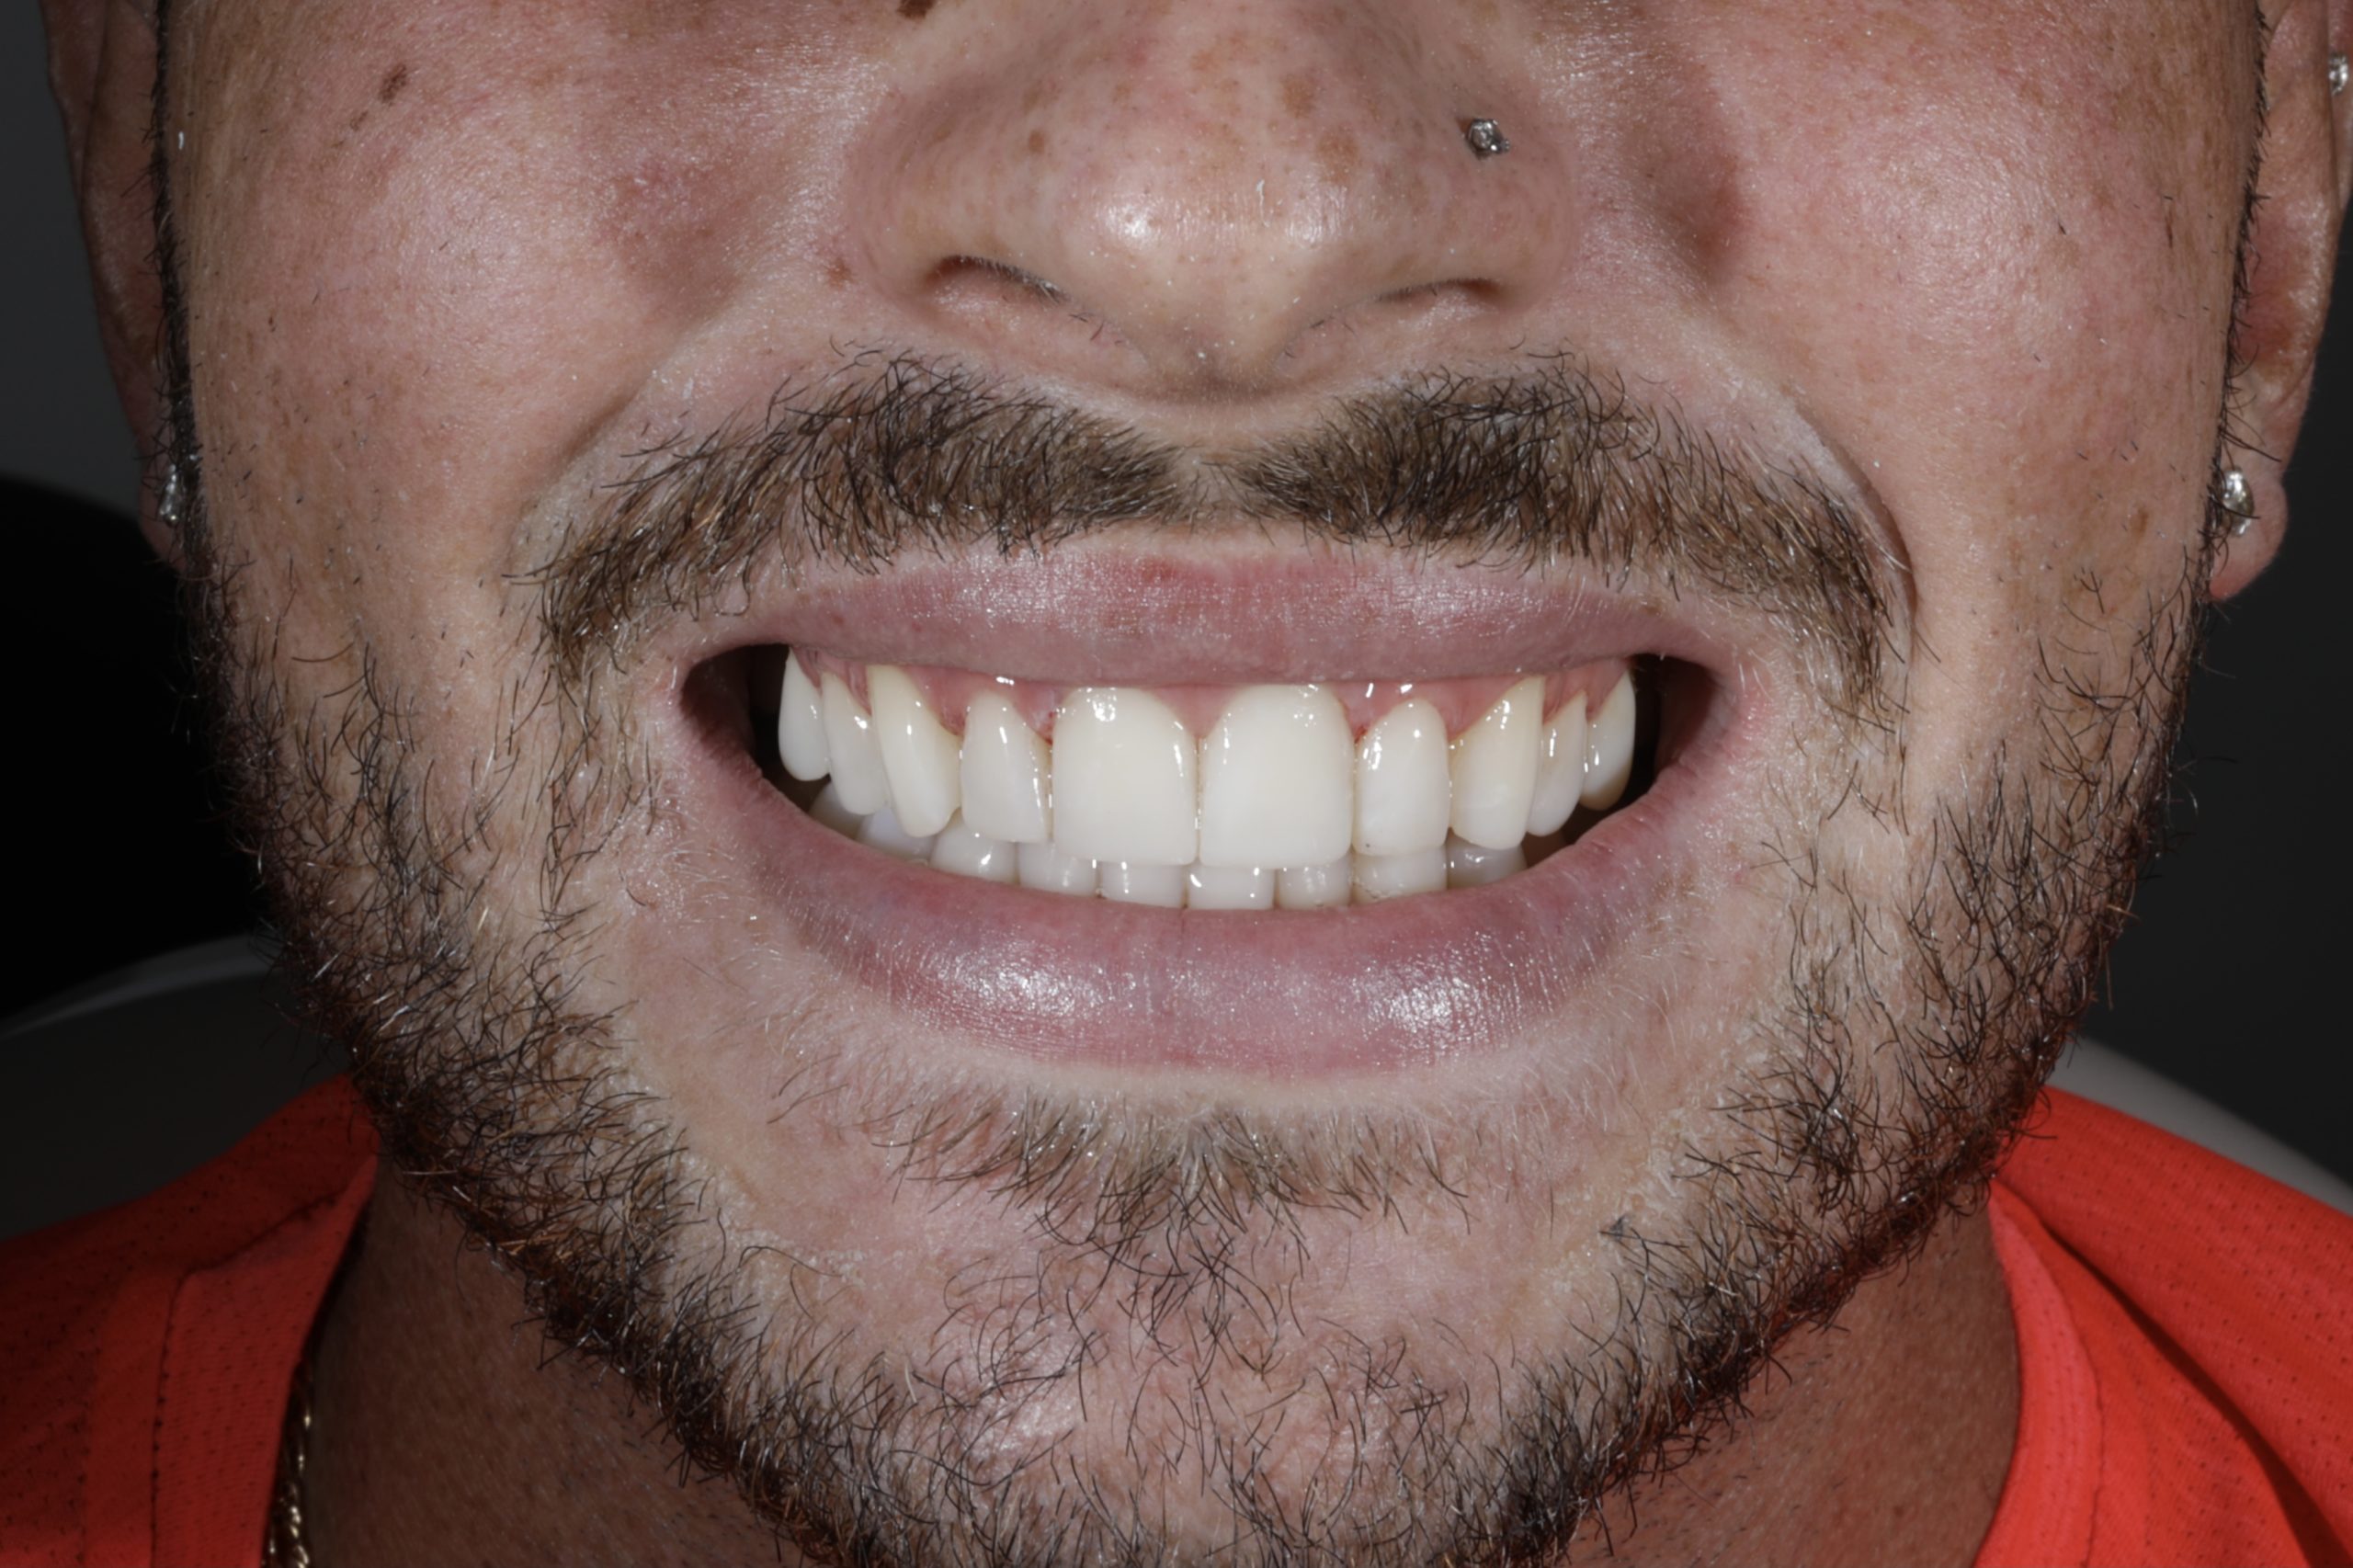 6 Teeth Composite Edge Bonding and 4 Composite Veneers to create a more even, wider smile